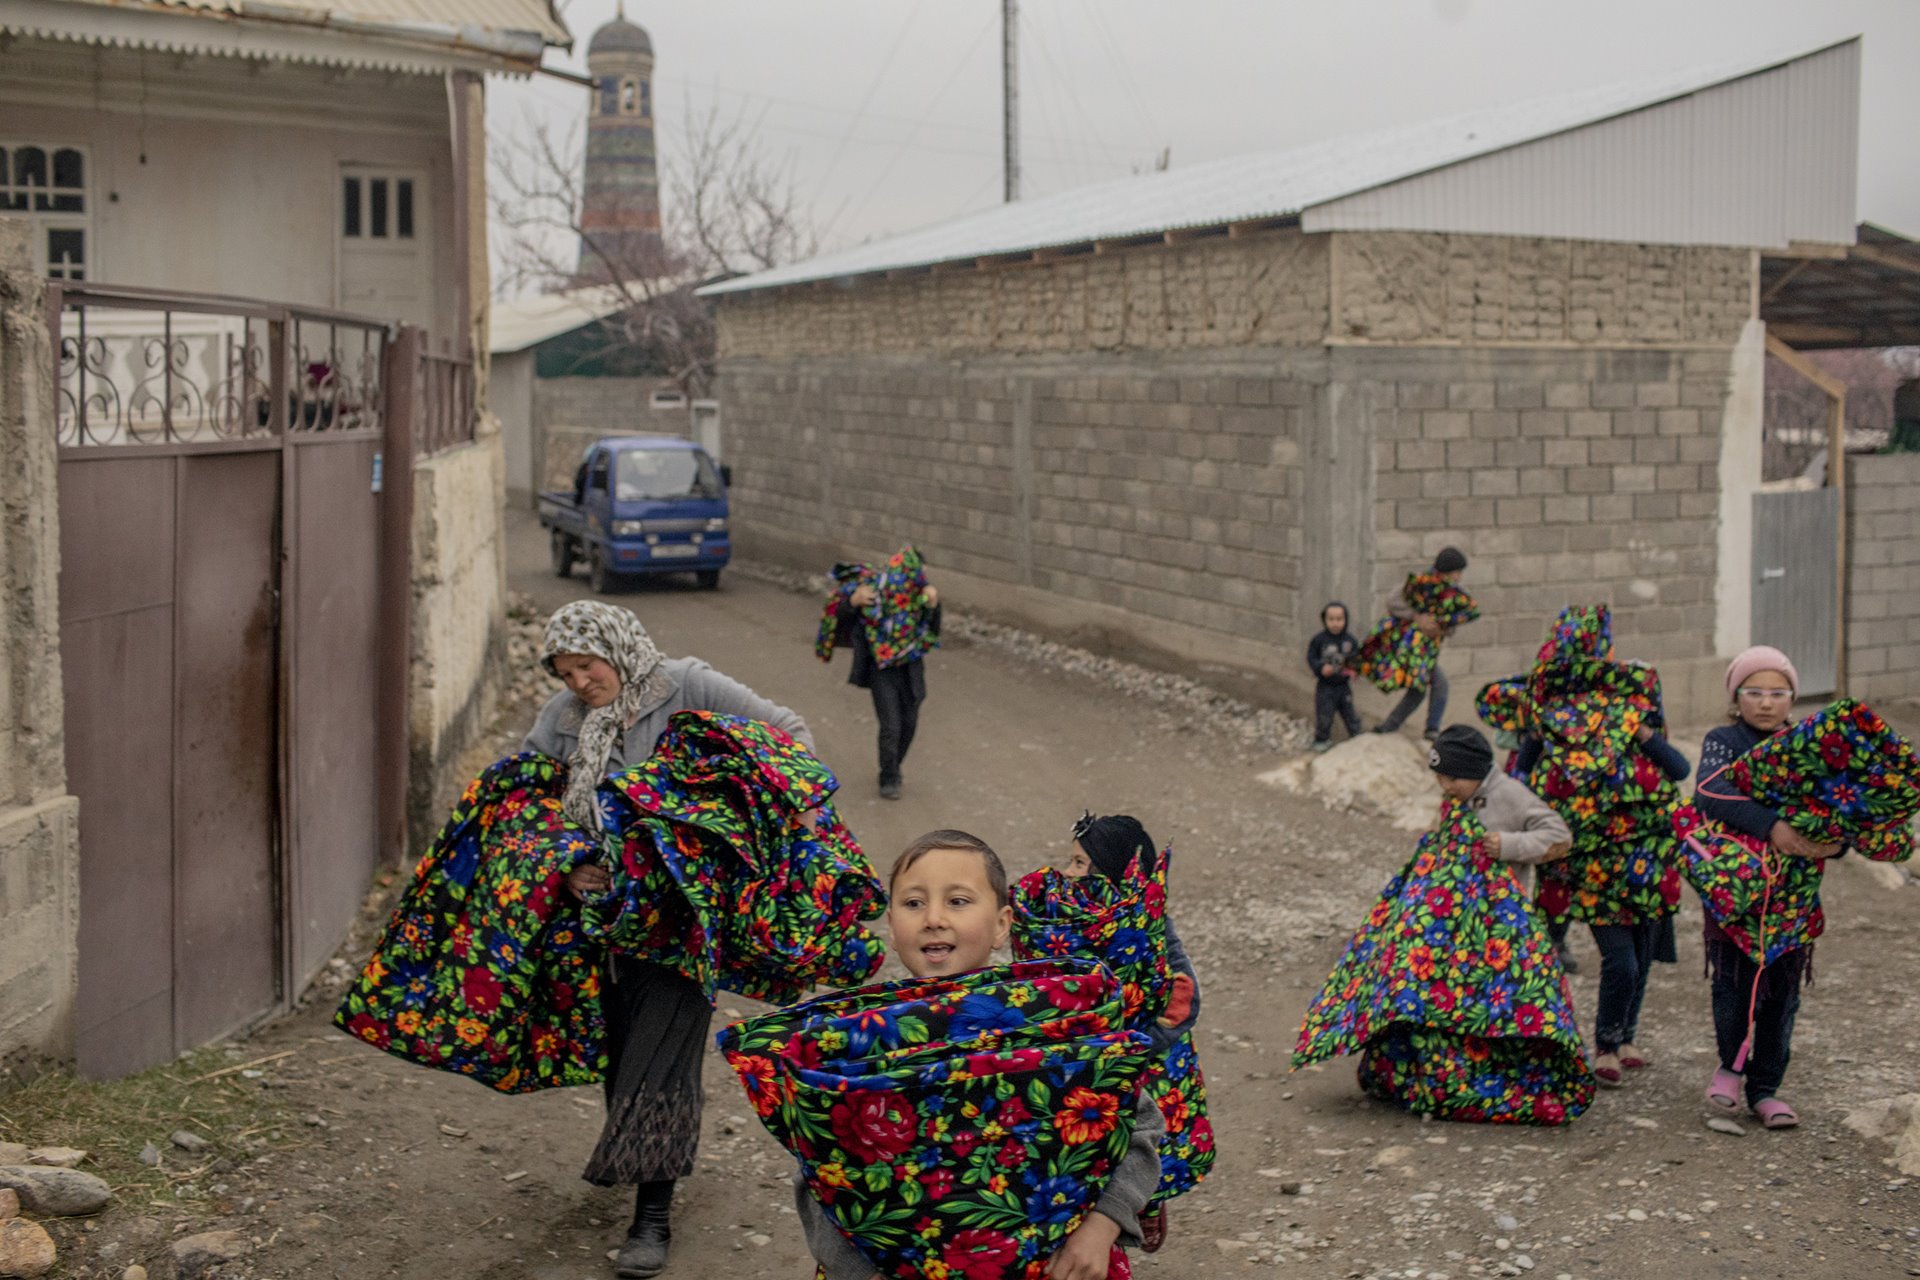 Majnuna Sirojiddinova (37), accompanied by village children, carry kurpacha (traditional cotton mattresses) from the local mosque to be repaired, in Khojai A&rsquo;lo, Tajikistan. Disagreements with Kyrgyzstan over a water distribution source turned into cross-border violence in 2021, affecting residents of Khojai A&rsquo;lo.